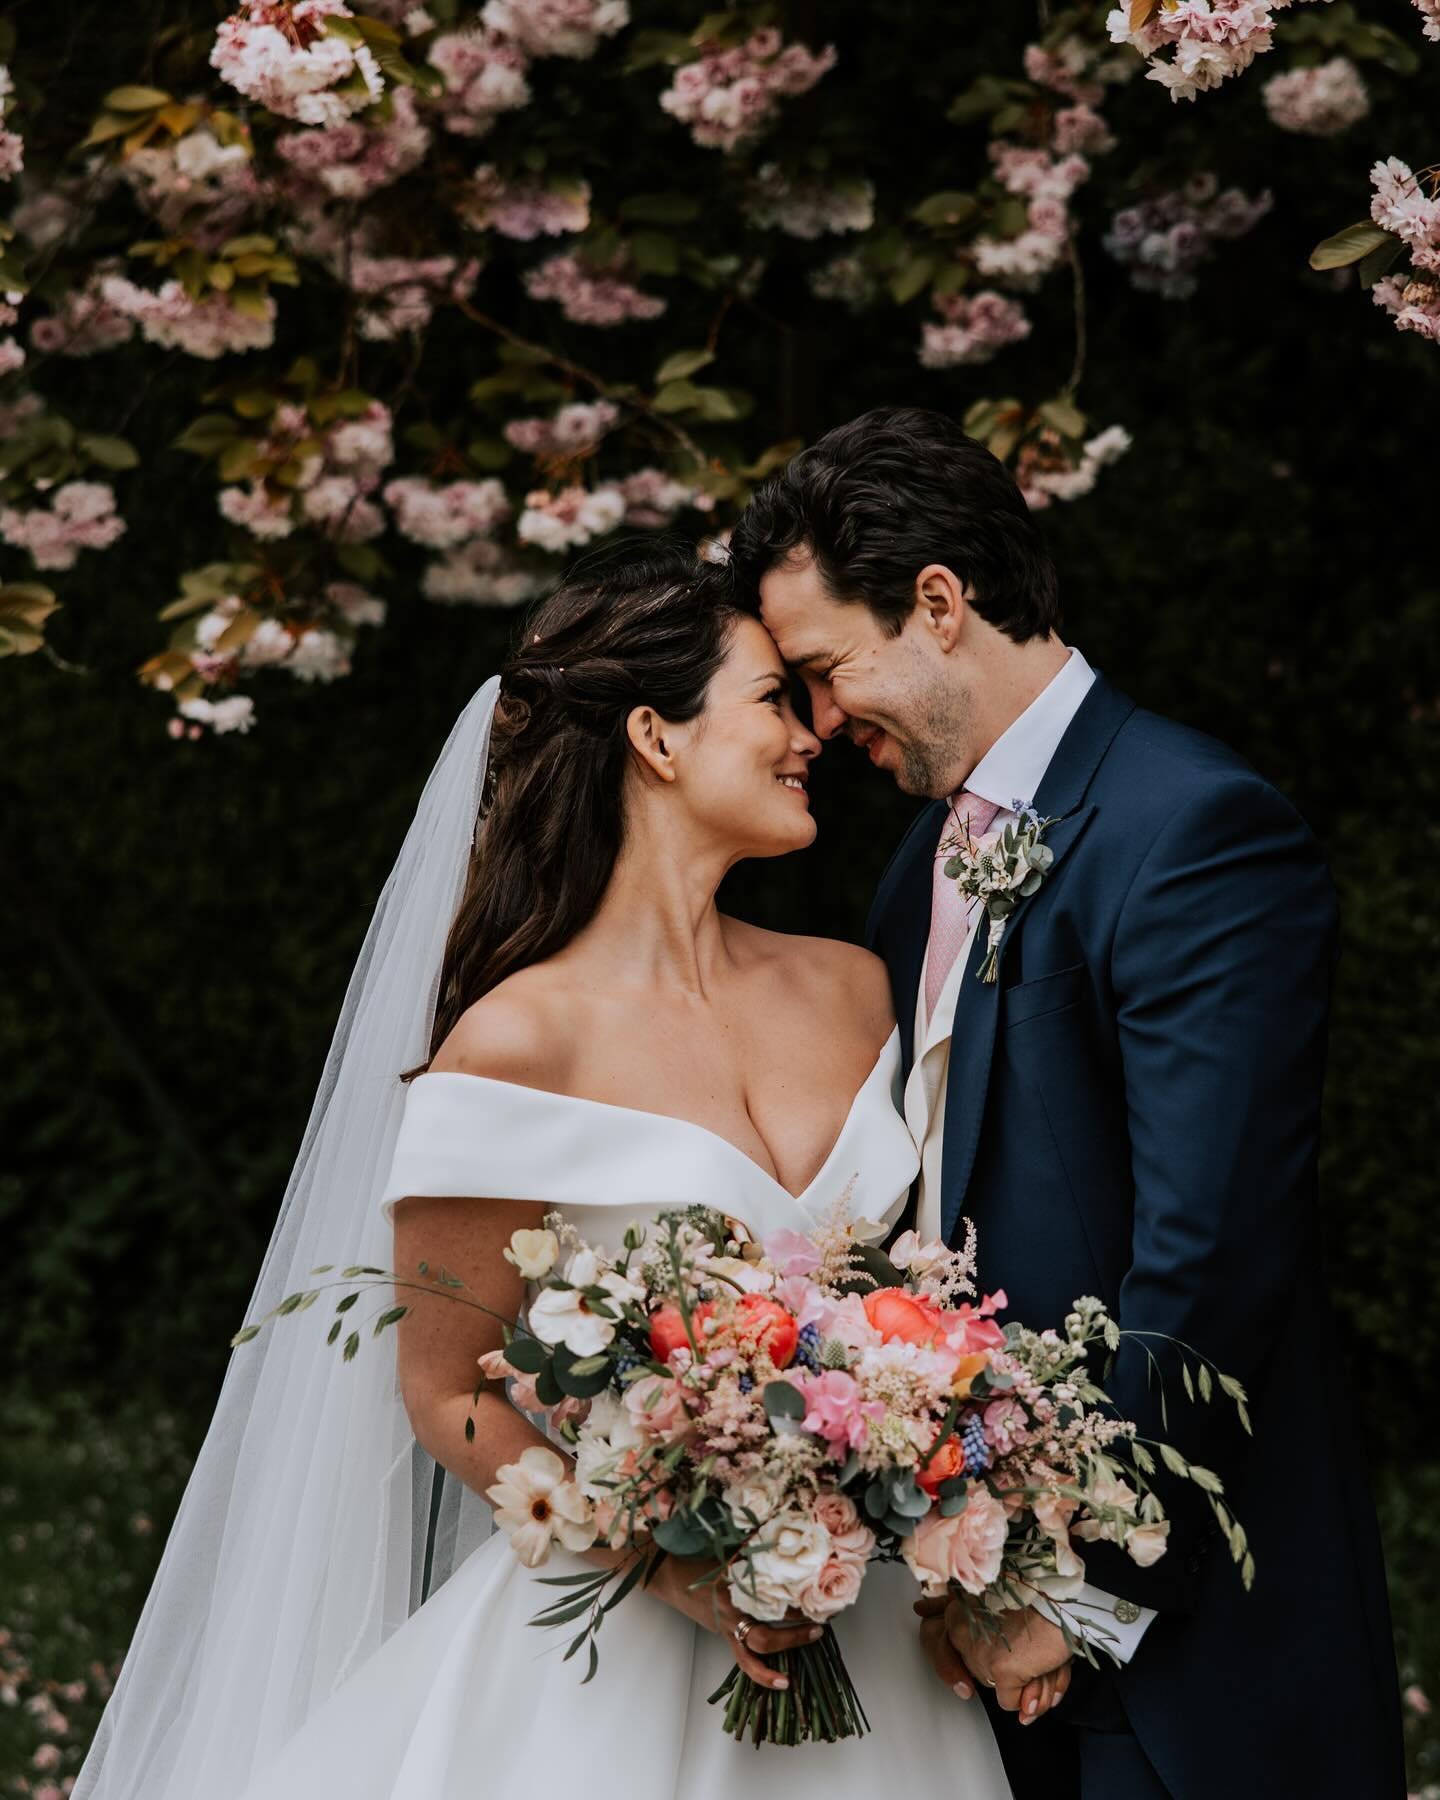 Introducing the absolute GOATs of wedding goodness, Juliet + Alex&rsquo;s quintessential English countryside wedding at gorgeous Pennard House did not disappoint!

Here&rsquo;s a few frames from their epic day in Somerset.

Suppliers:

Venue - @penna